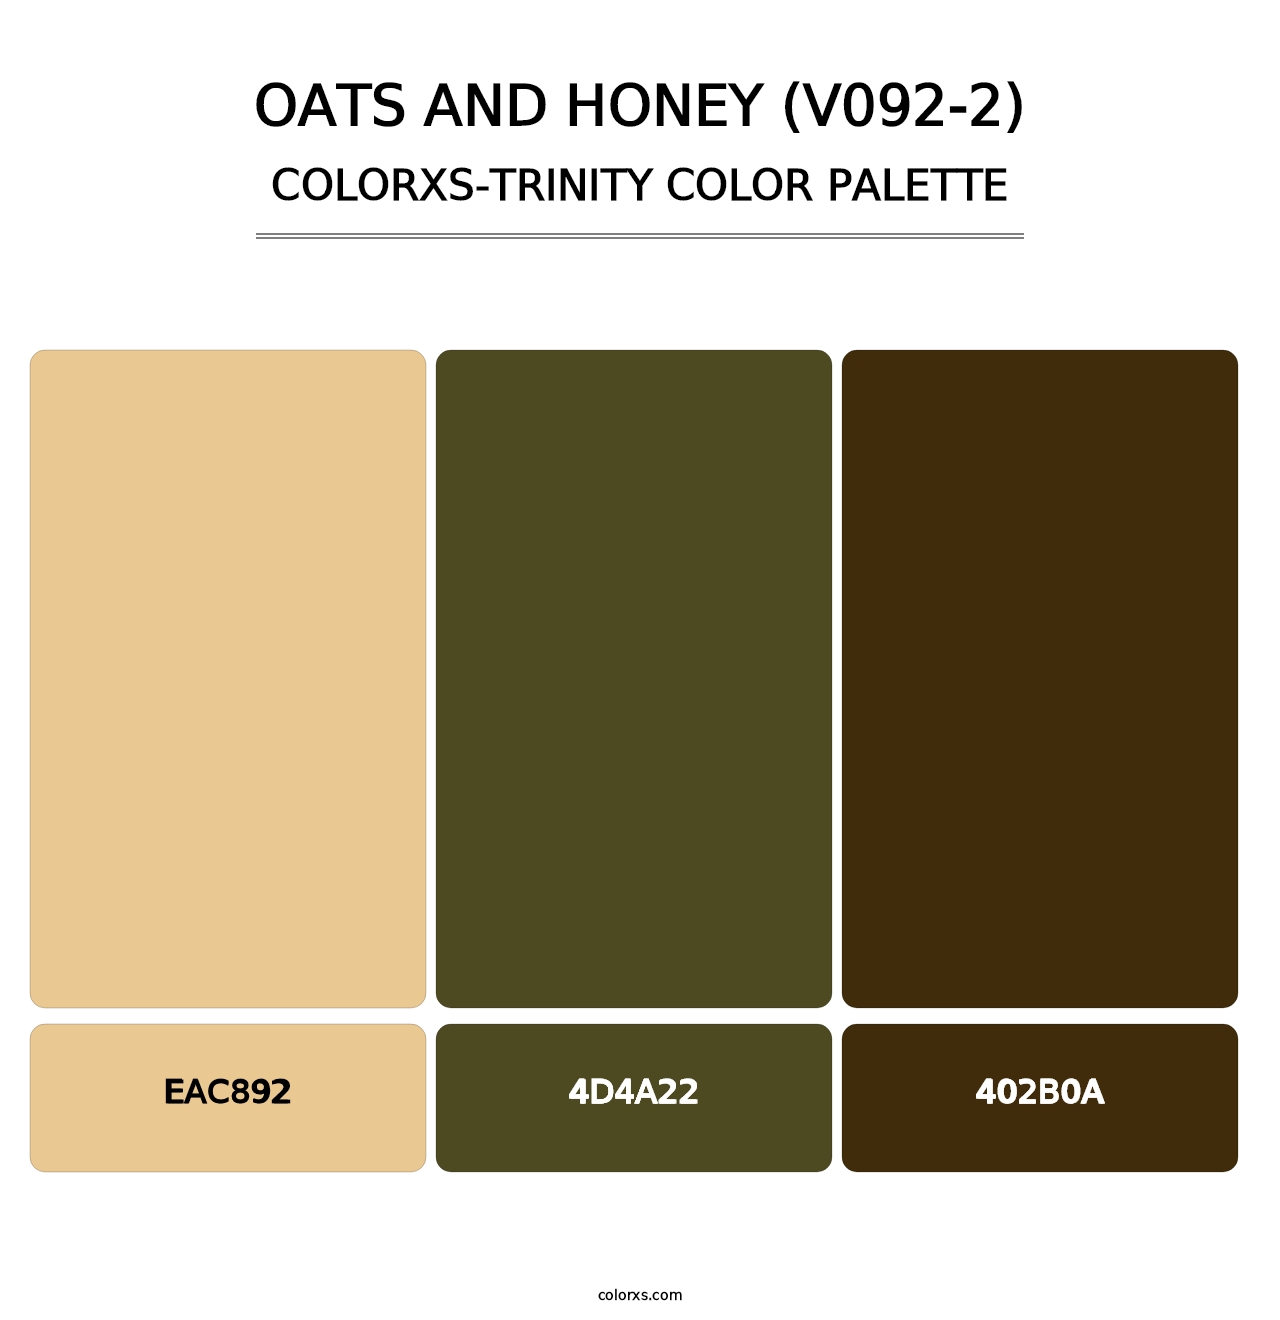 Oats and Honey (V092-2) - Colorxs Trinity Palette